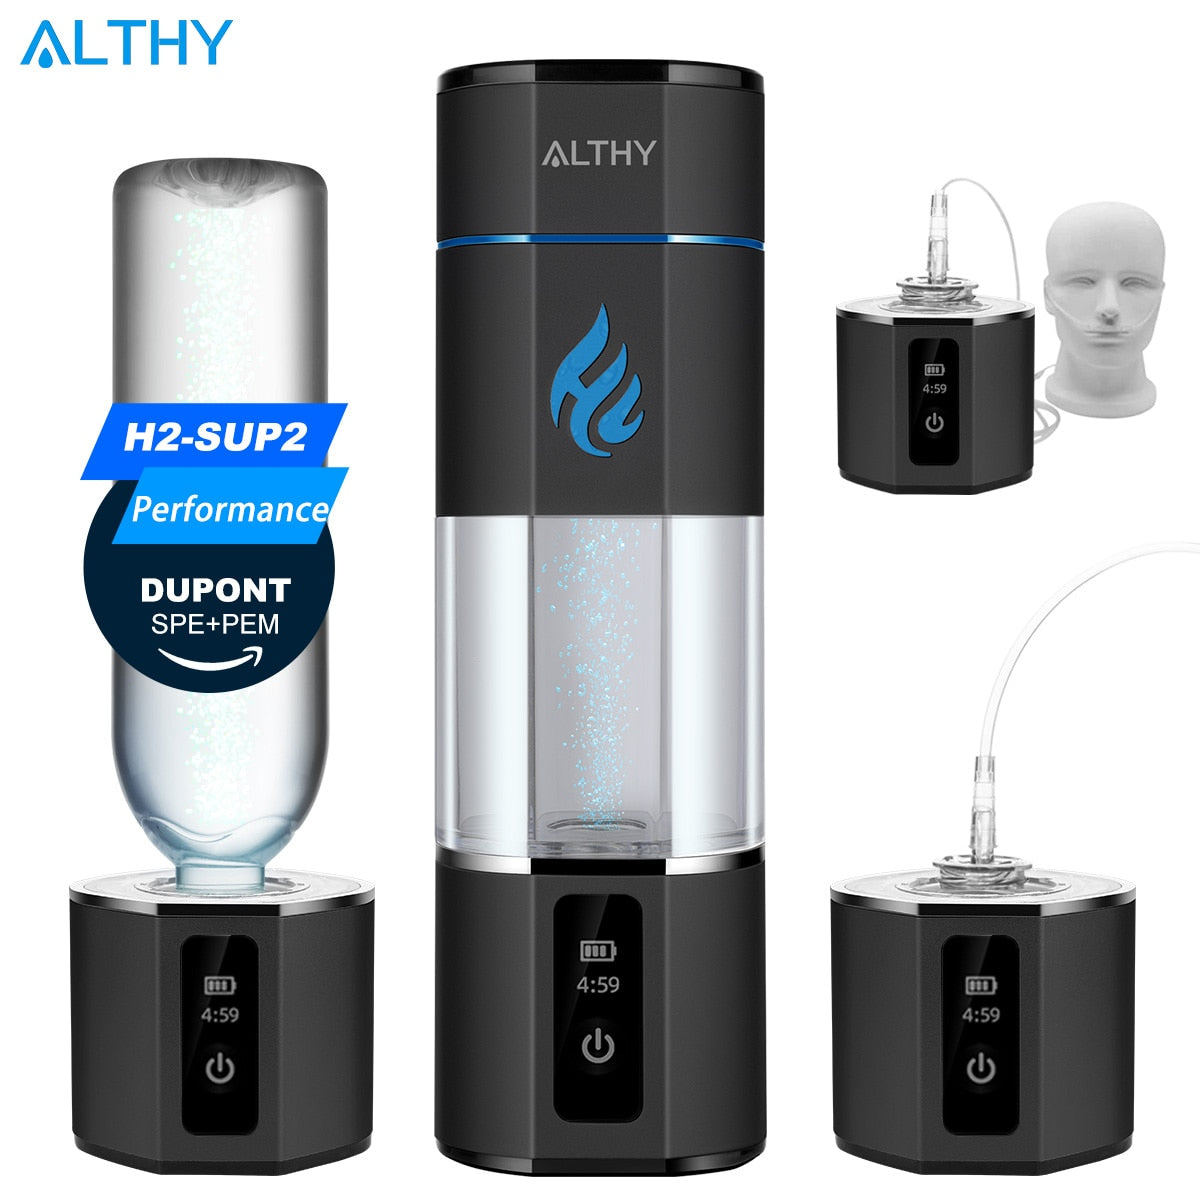 ALTHY H2-SUP2 Hydrogen Water Generator Bottle UDuPont SPE&PEM Dual Chamber lonizer Cup + Time&Battery Display + H2 Inhalation